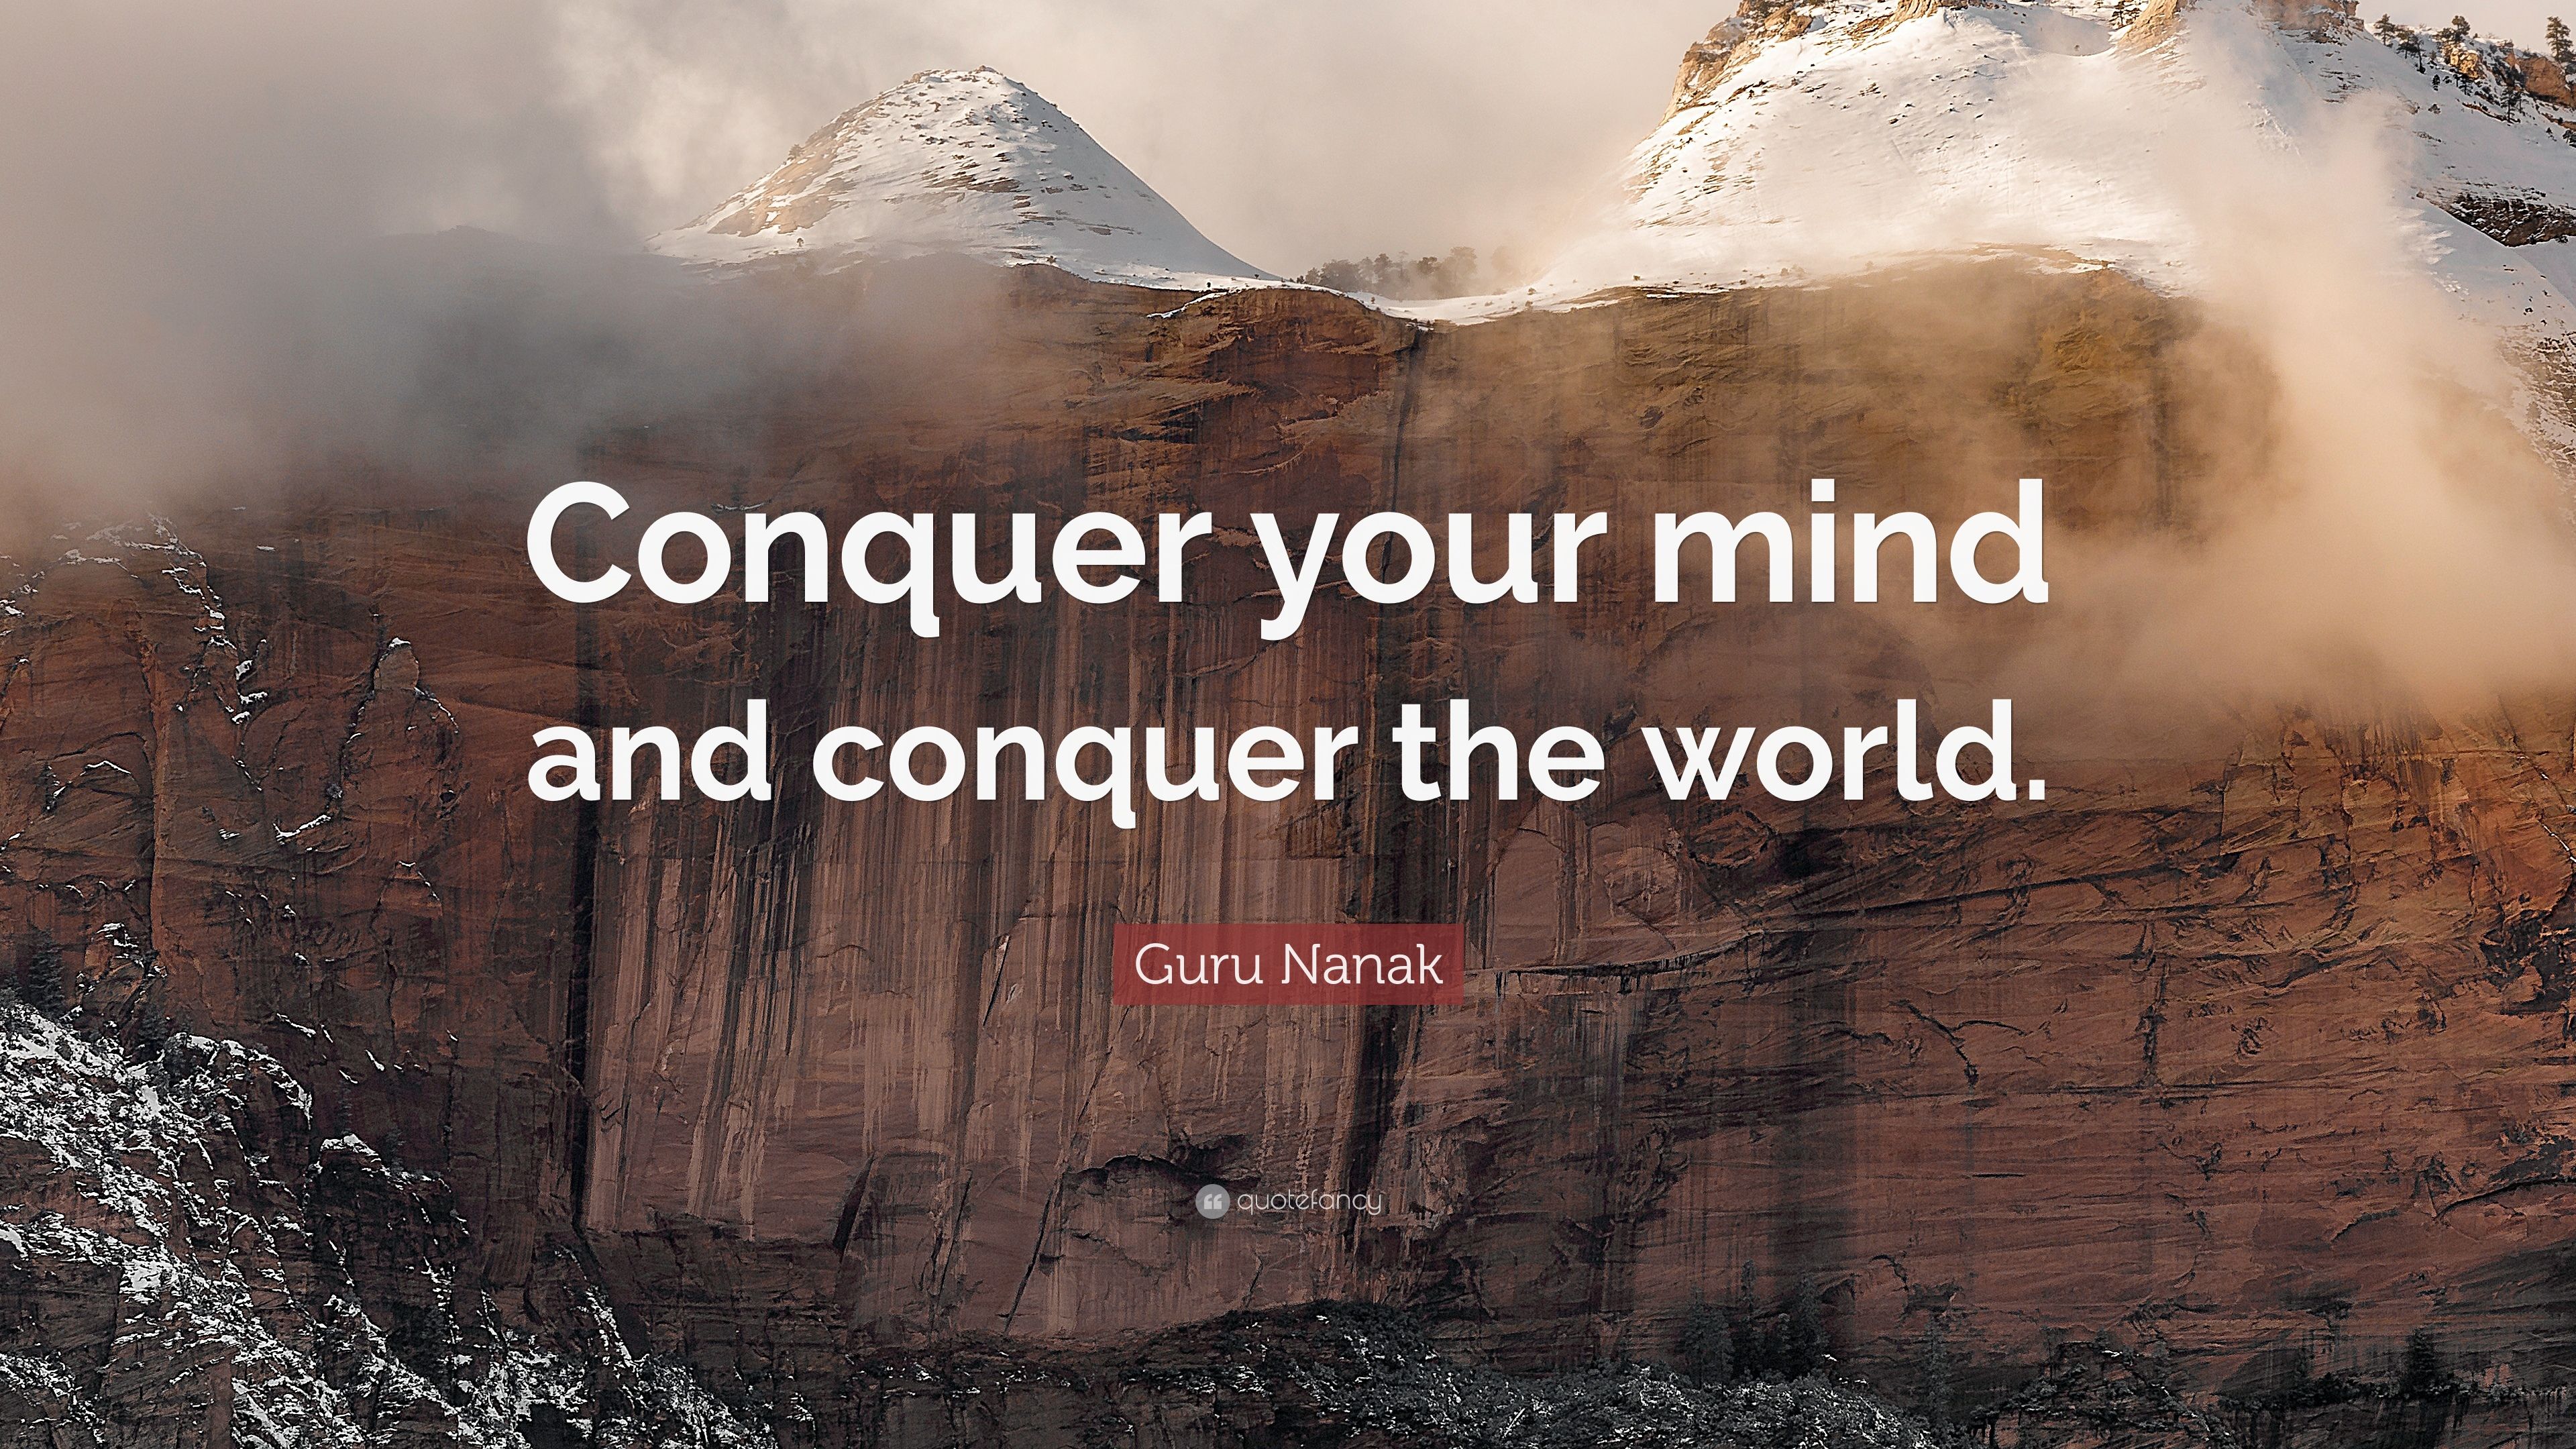 Guru Nanak Quote: “Conquer your mind and conquer the world.” 12